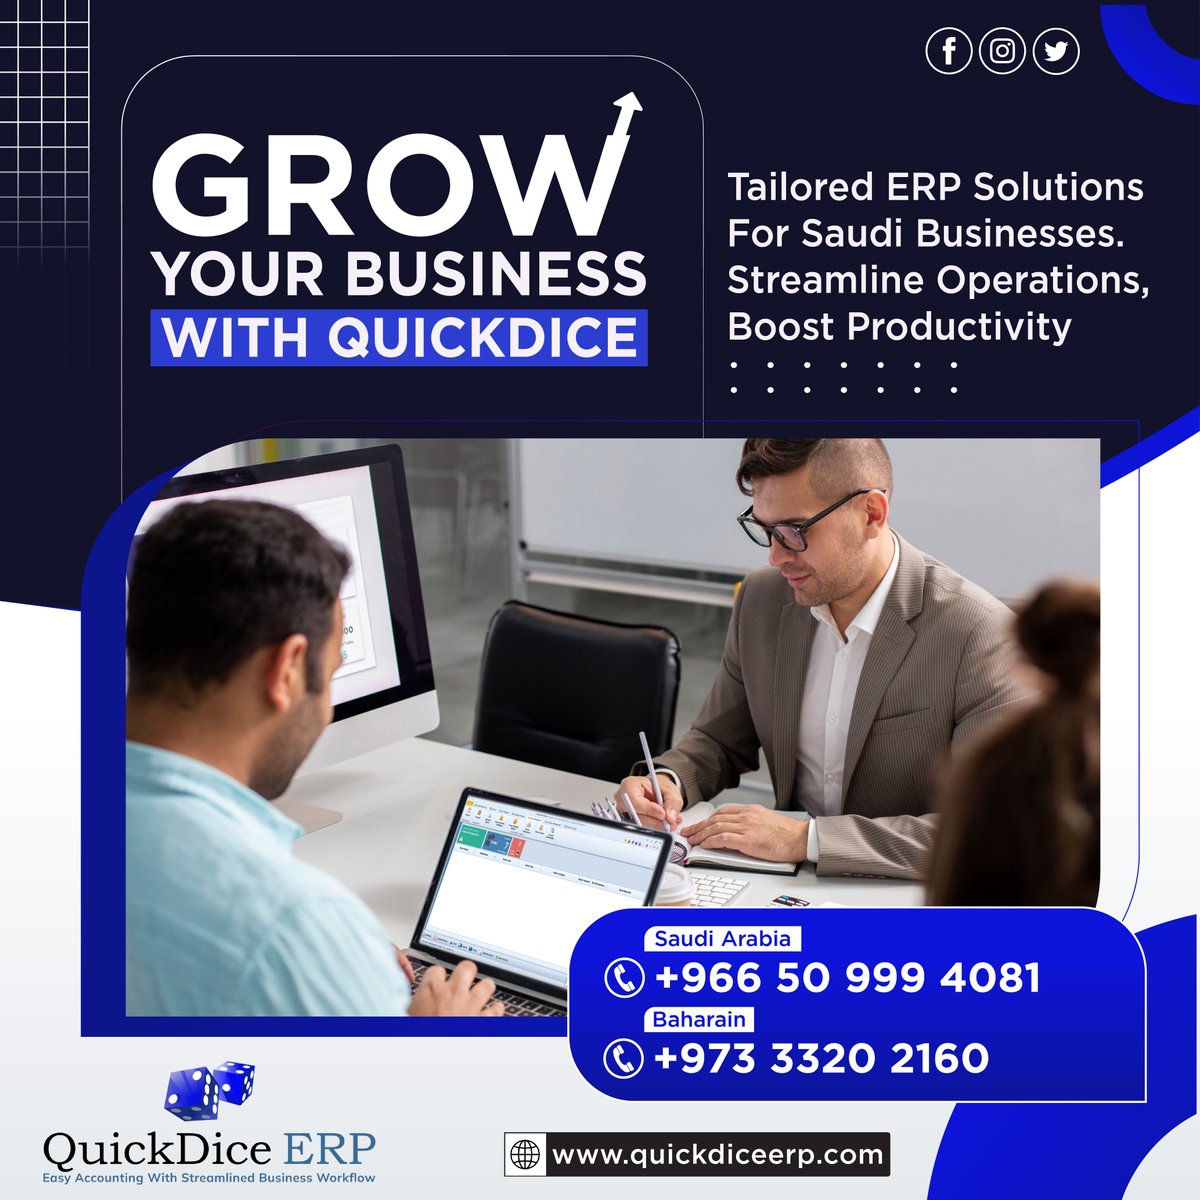 Unlock business potential with QuickDice ERP: streamline operations, optimize workflows and drive growth effortlessly. Say goodbye to manual tasks welcome seamless automation. #pulseinfotech  #quickdiceaccounting#einvoicing #saudiarabia #ksa 

🌐 quickdiceerp.com